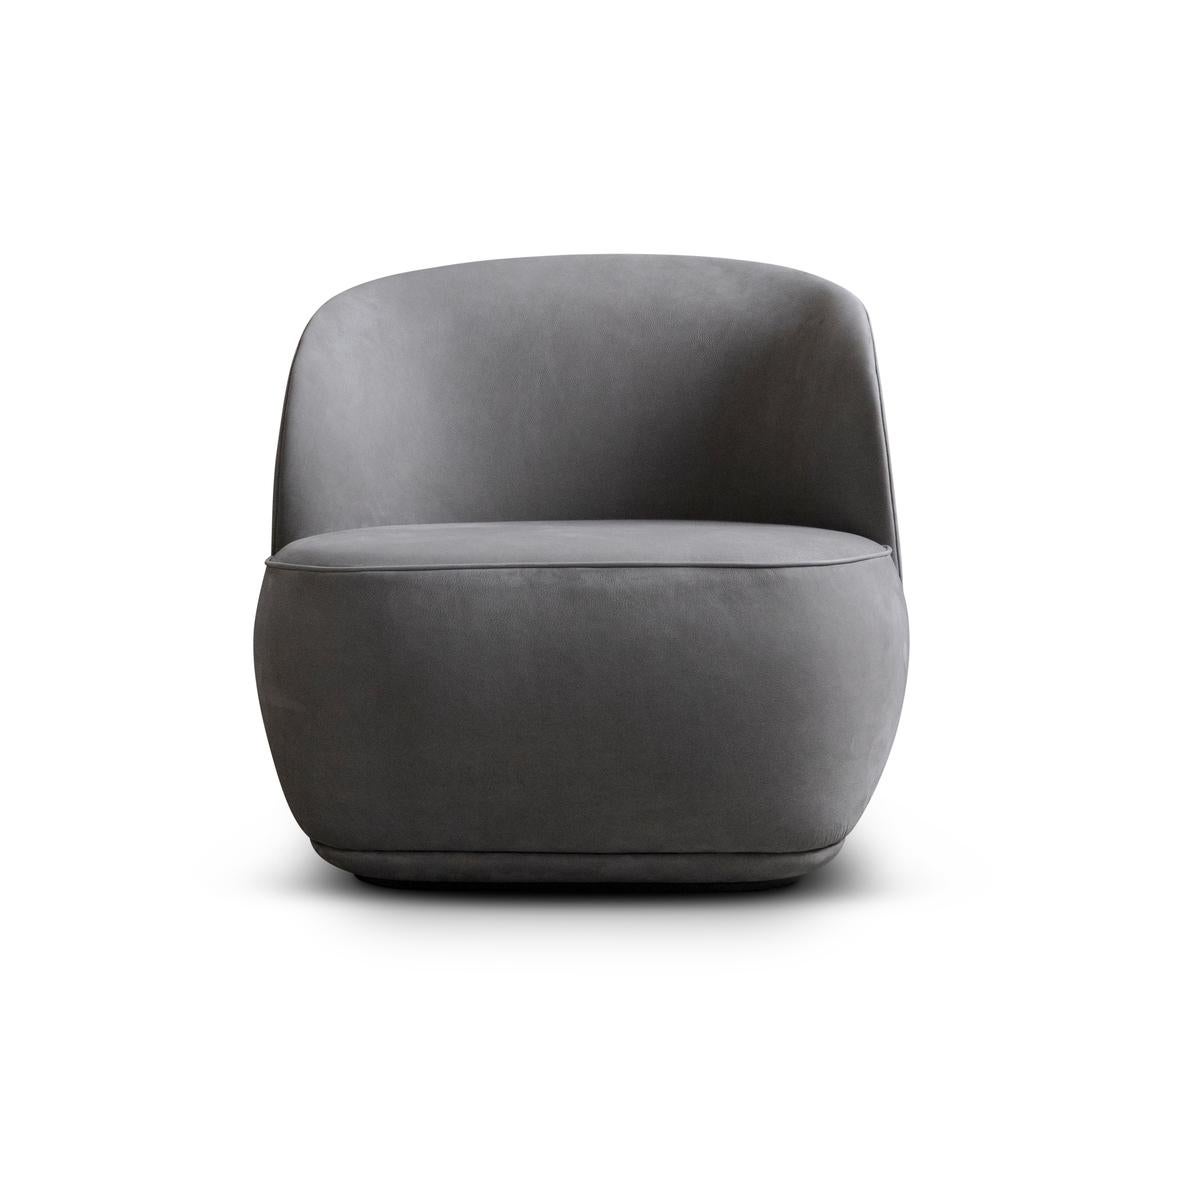 La Pipe lounge - armchair
Design: Friends & Founders

Available with fixed base or return swivel
Upholstery available in a wide range of fabrics and leathers
Model shown (fabric): Sorensen, Royal Nubuck 30254

Price may vary depending on the swivel